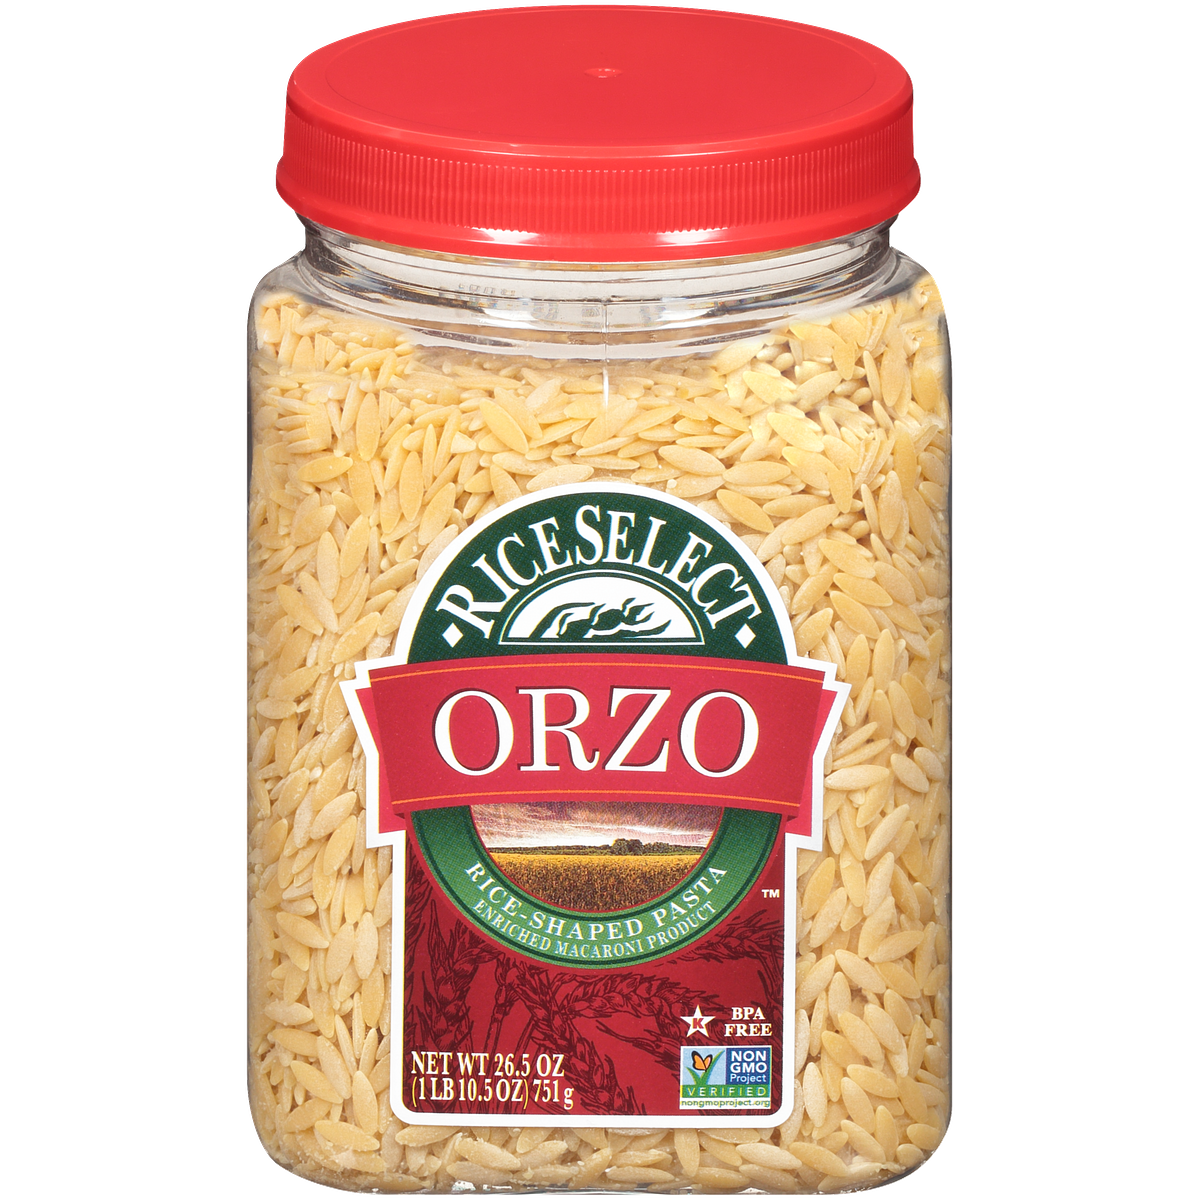 RiceSelect® | Orzo Recipes and Products